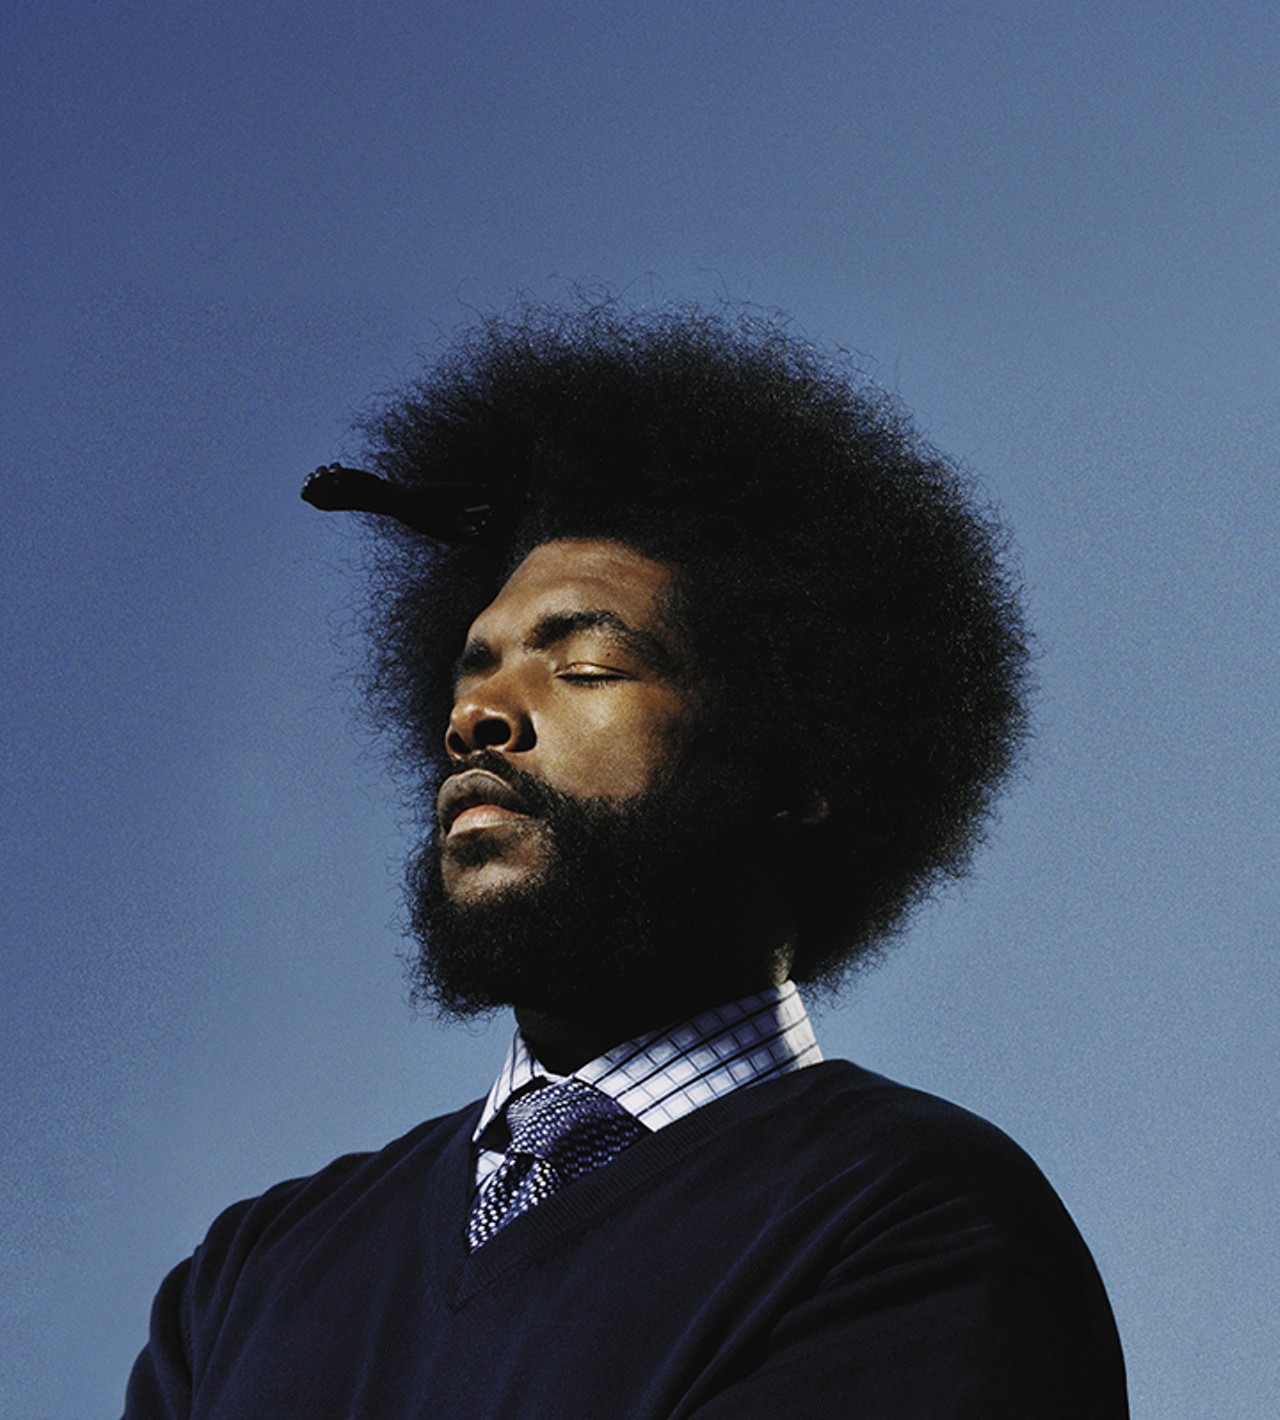 Wednesday, April 5Questlove at the Social